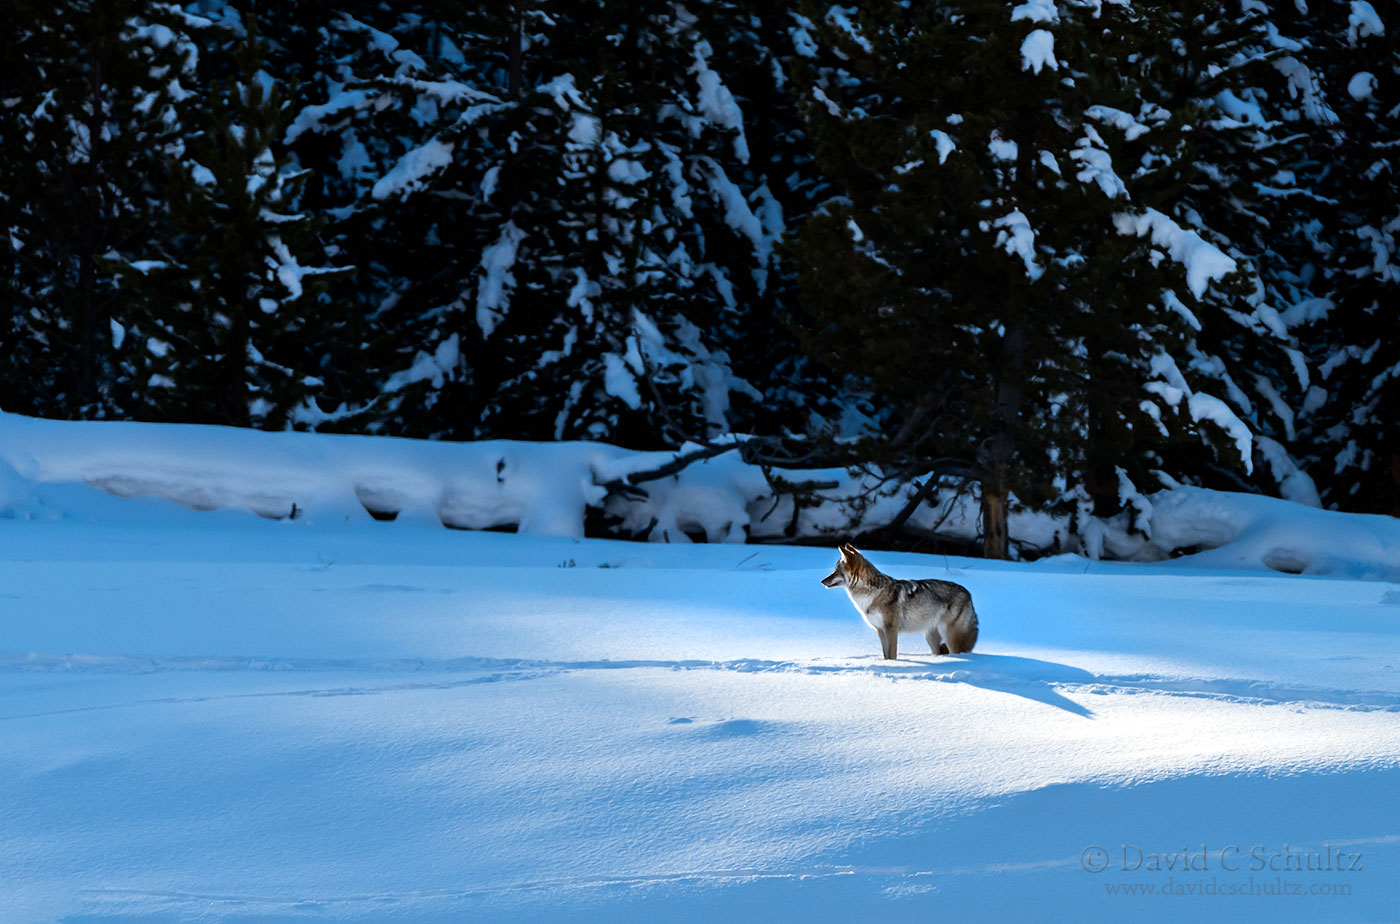 Coyote in Yellowstone - Image #161-6660